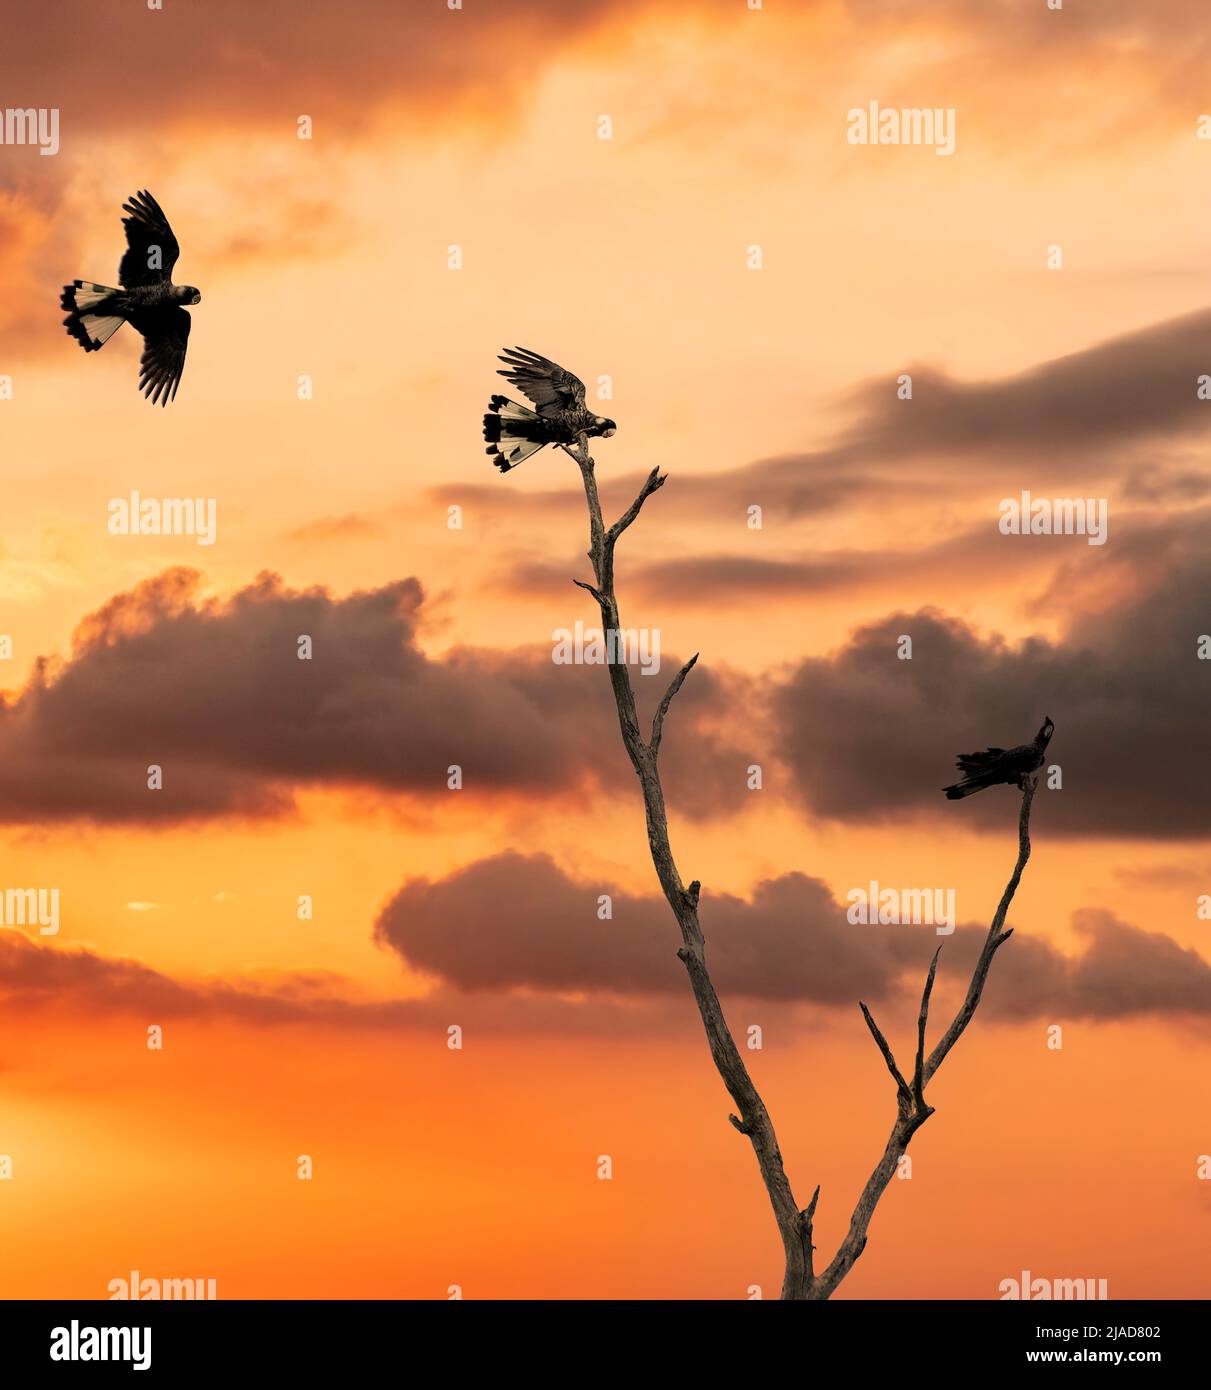 Silhouette of three Short-billed Black Cockatoos (Calyptorhynchus latirostris) in flight and perched on a tree at sunset, Australia Stock Photo